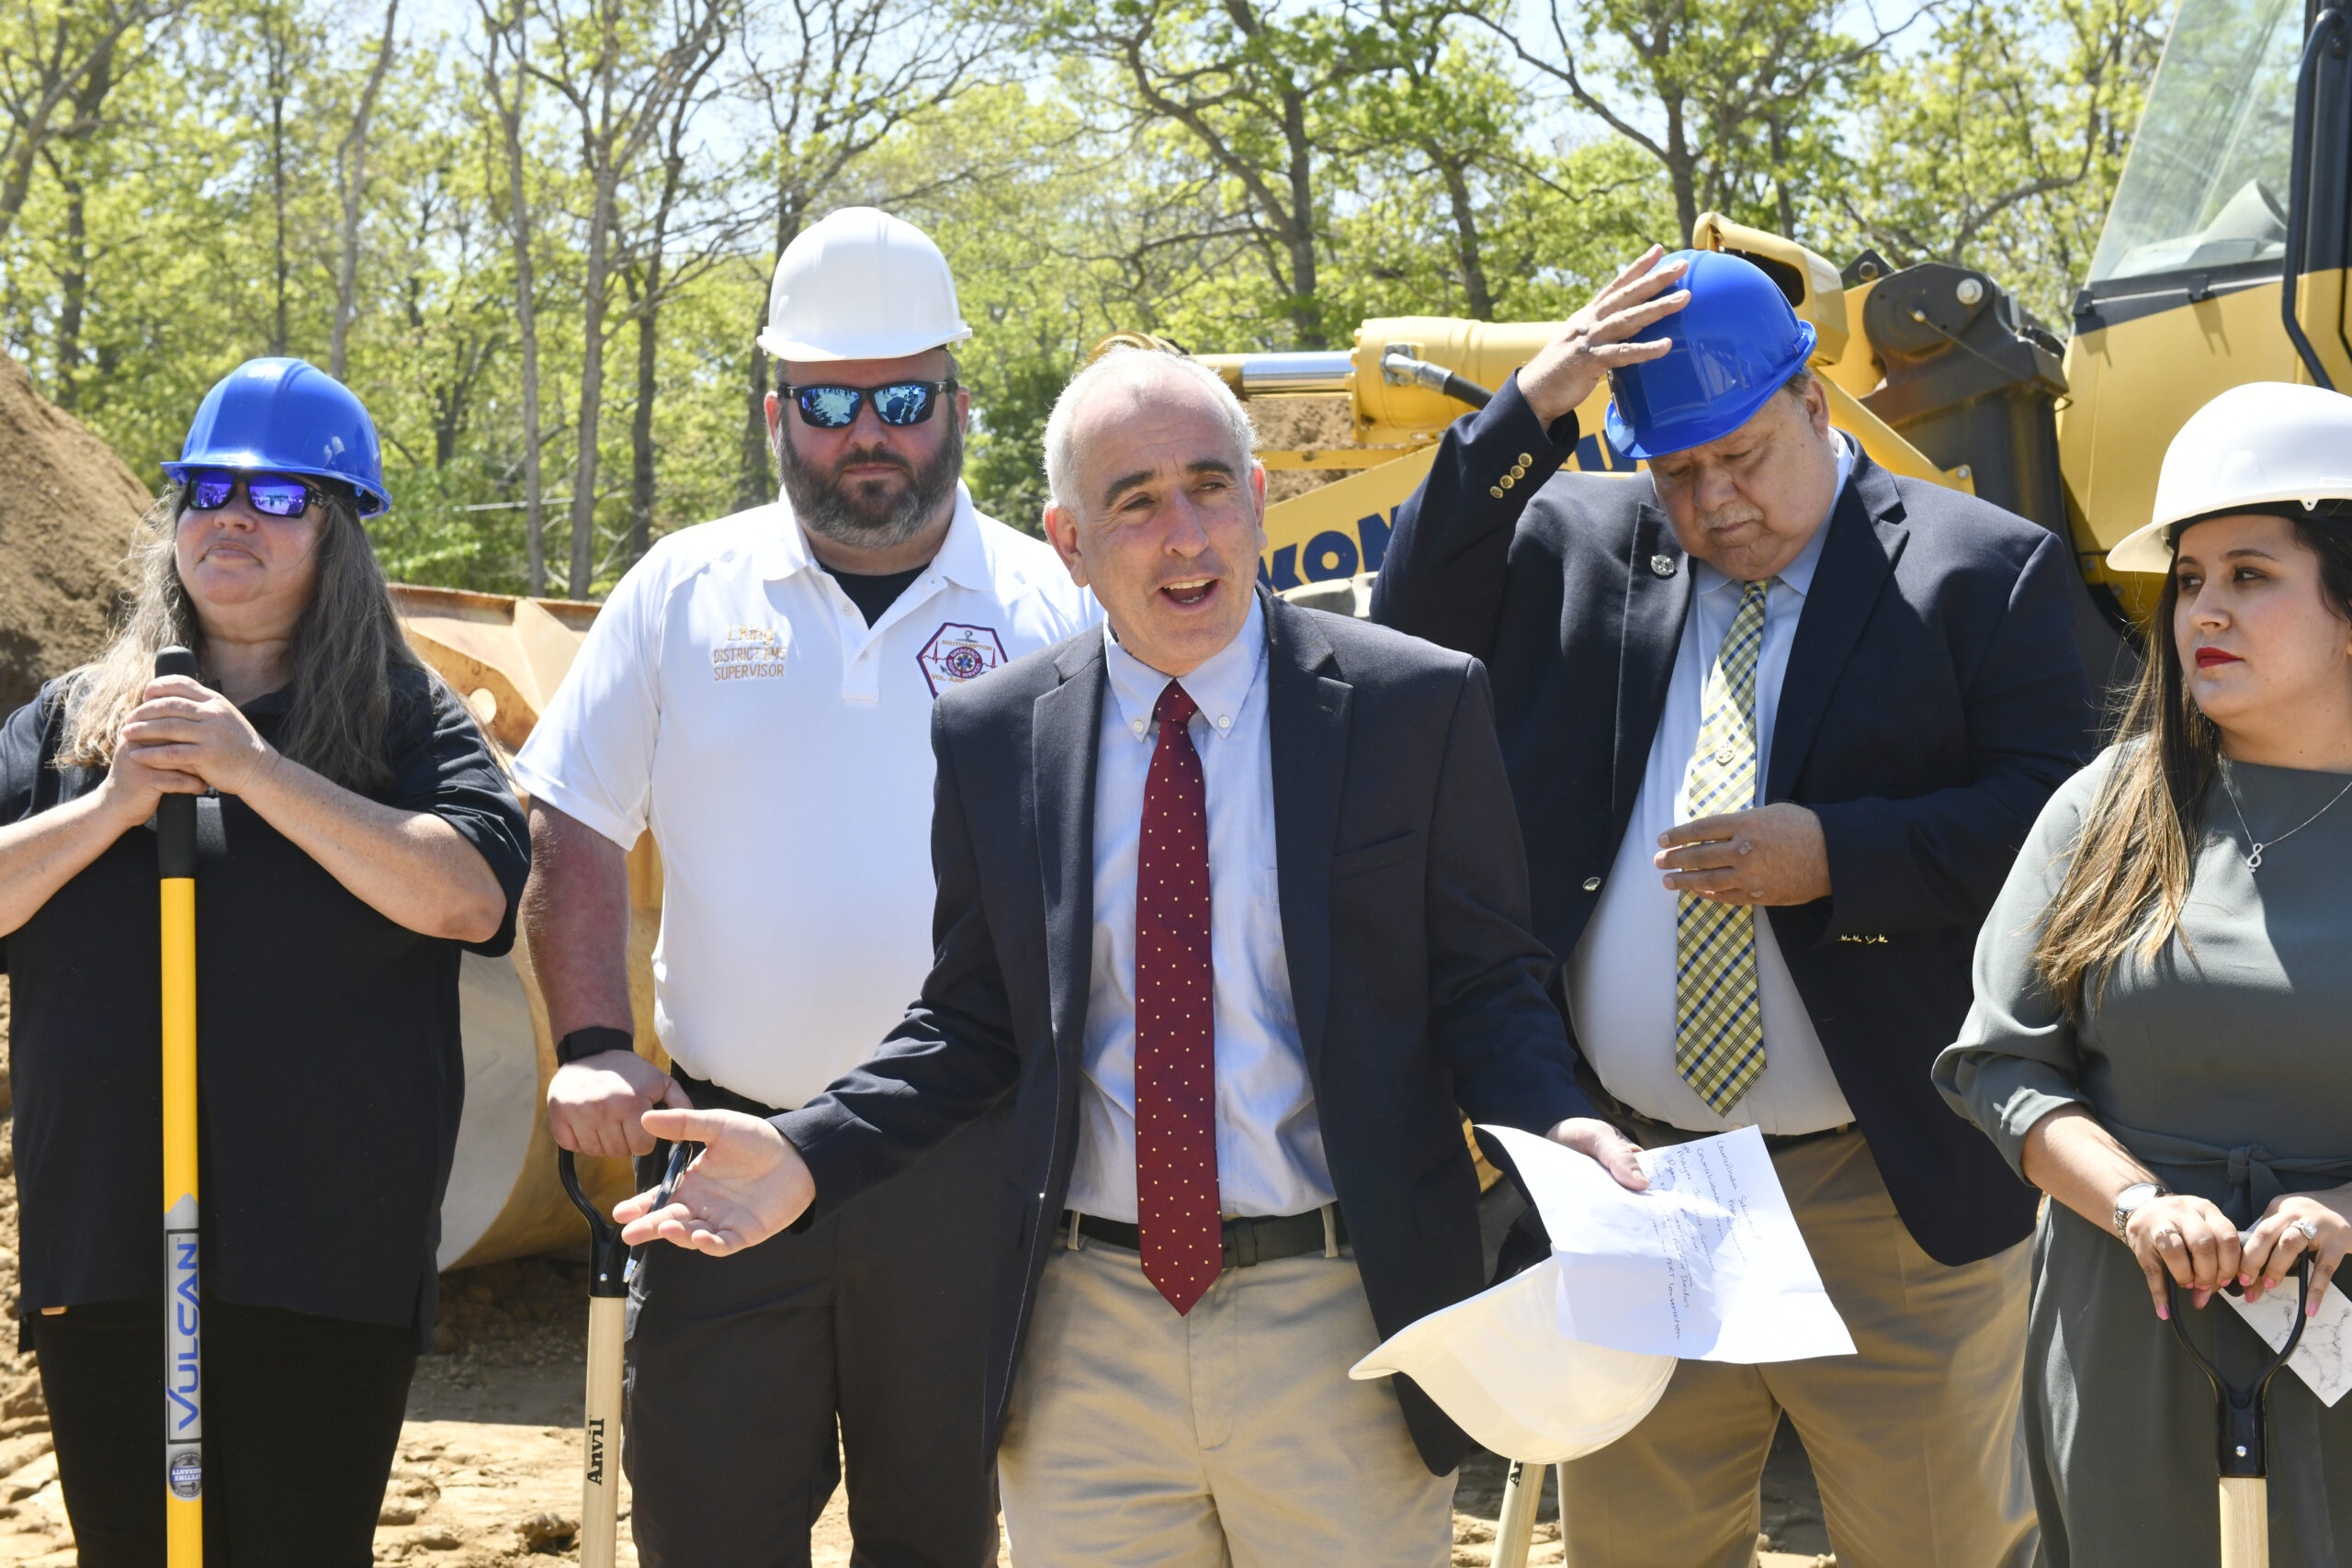 Southampton town Supervisor Jay Schneiderman welcomes the crowd to the groundbreaking of the new Southampton Volunteer Ambulance headquarters on Tuesday.  DANA SHAW